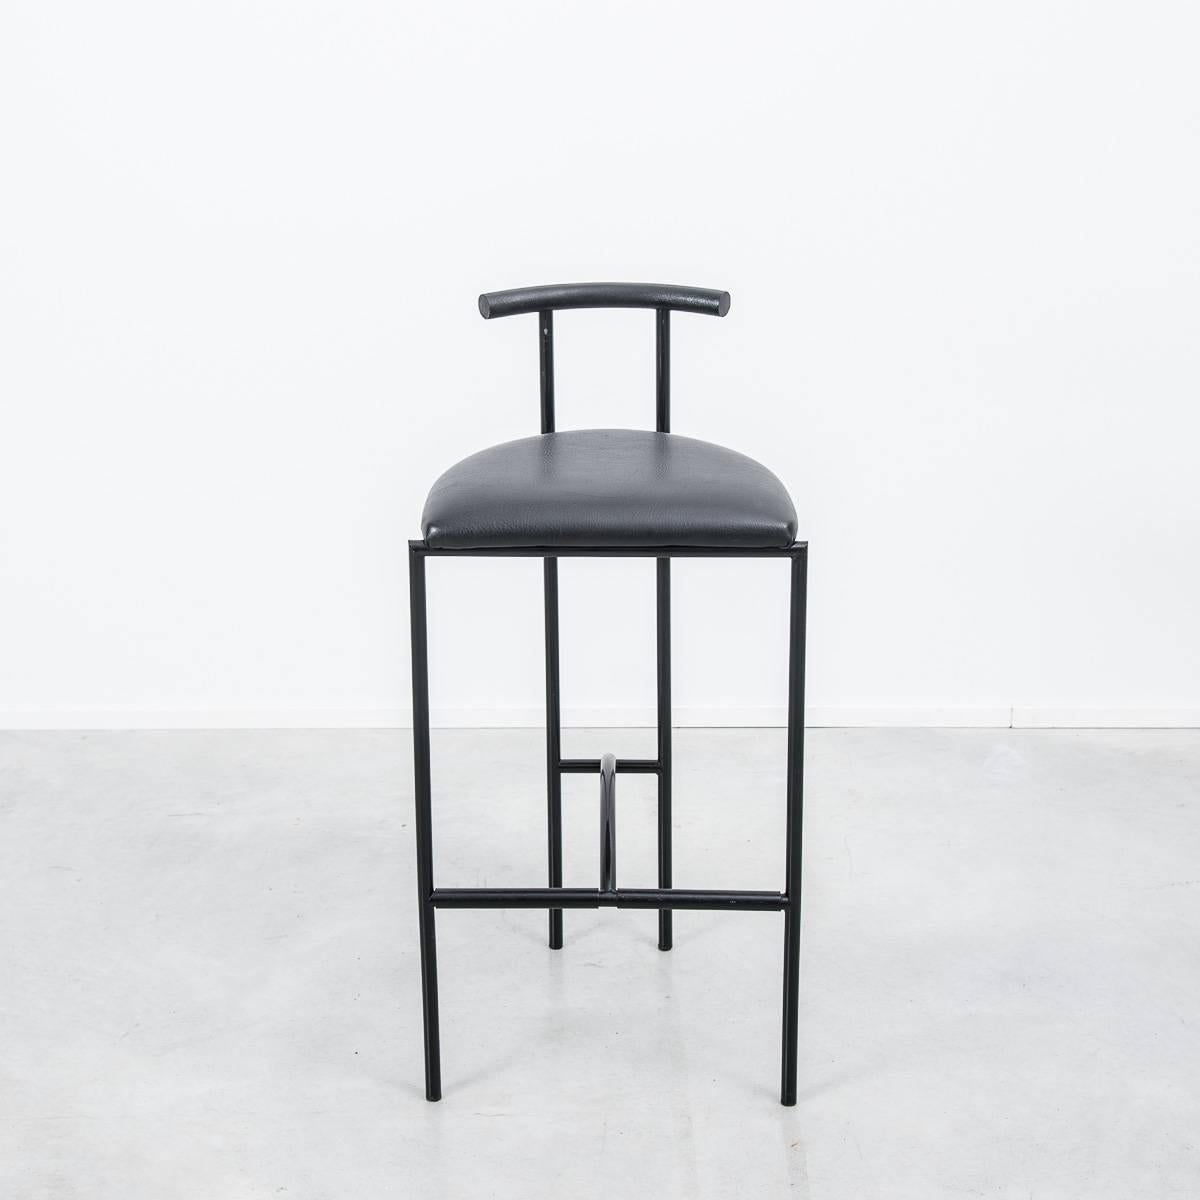 It’s all about the lines. Three original 1980s Tokyo bar stools designed by Rodney Kinsman for Italian manufacturer, Bieffeplast. Made from a black powder coated steel tubular steel frame with a black vinyl seat, they were original designed for